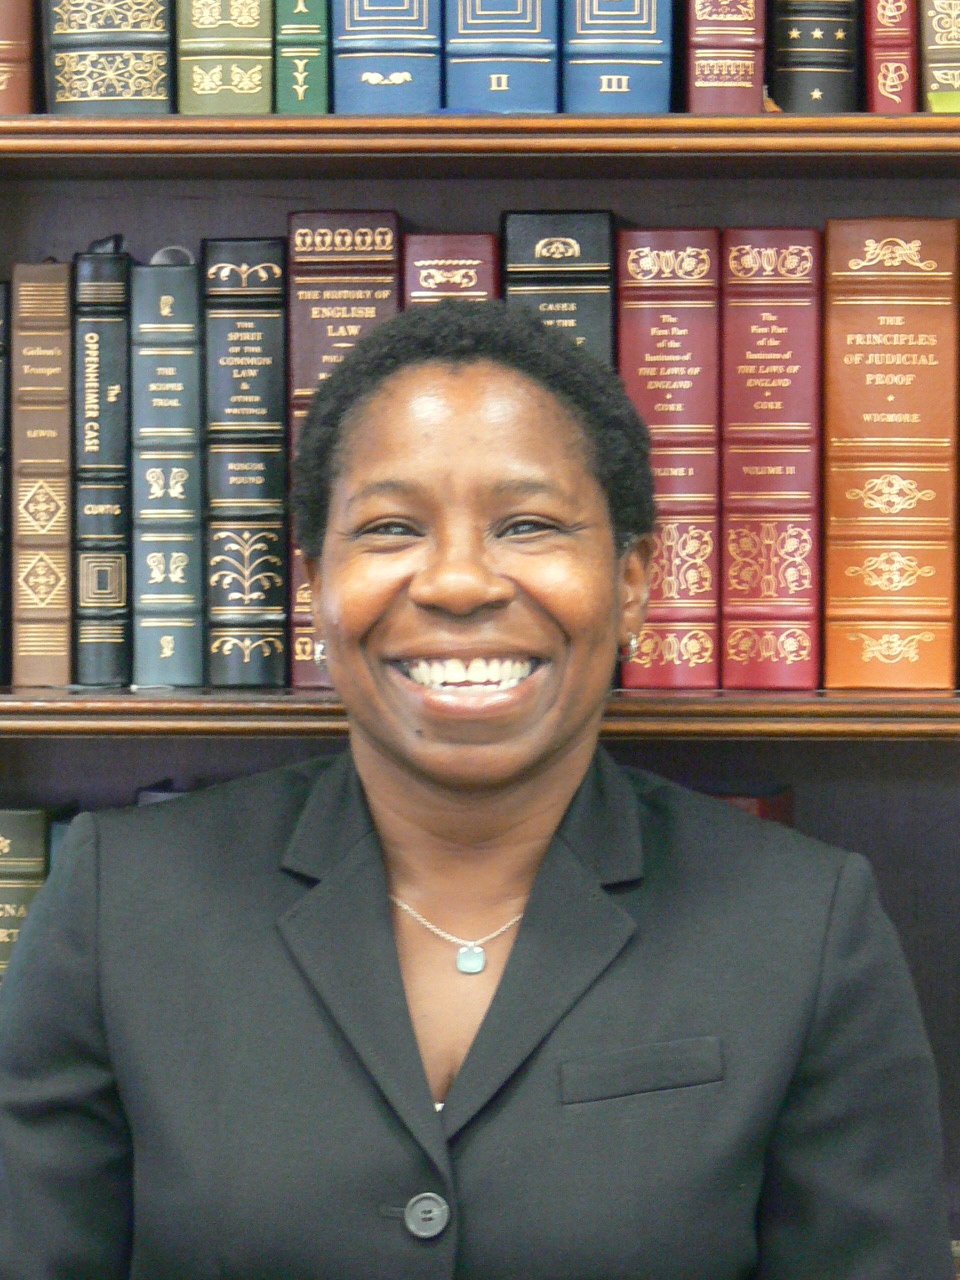 Professor Nicholson to receive UofL's Exemplary Multicultural Teaching Award